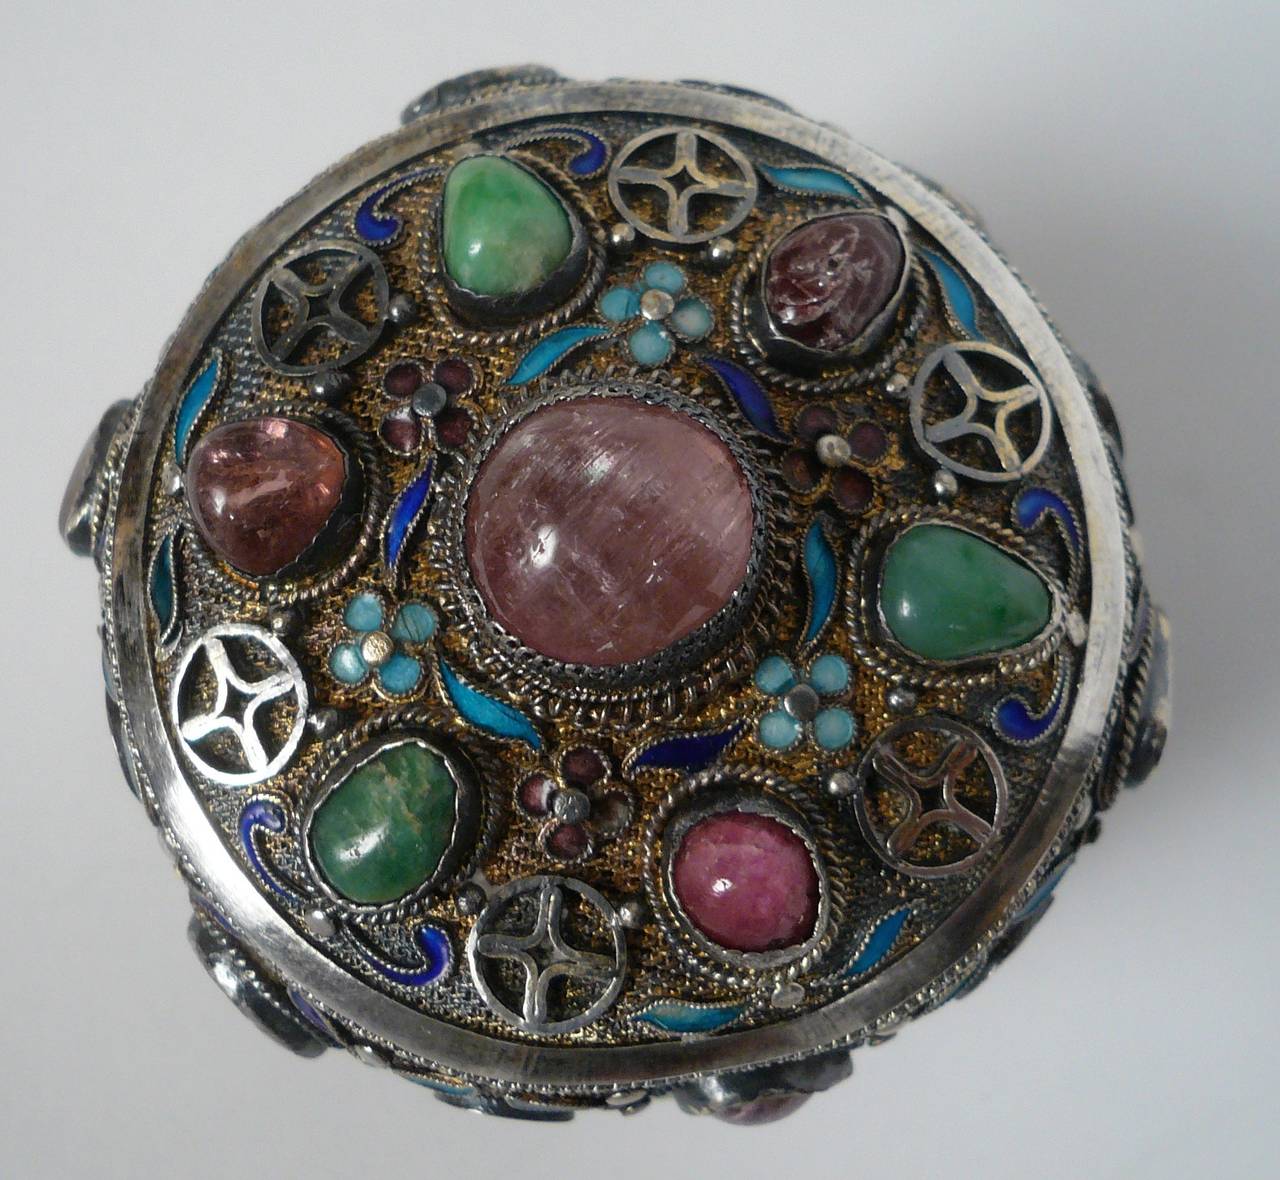 Carved Chinese Enameled Silver, Jade, and Stone Box